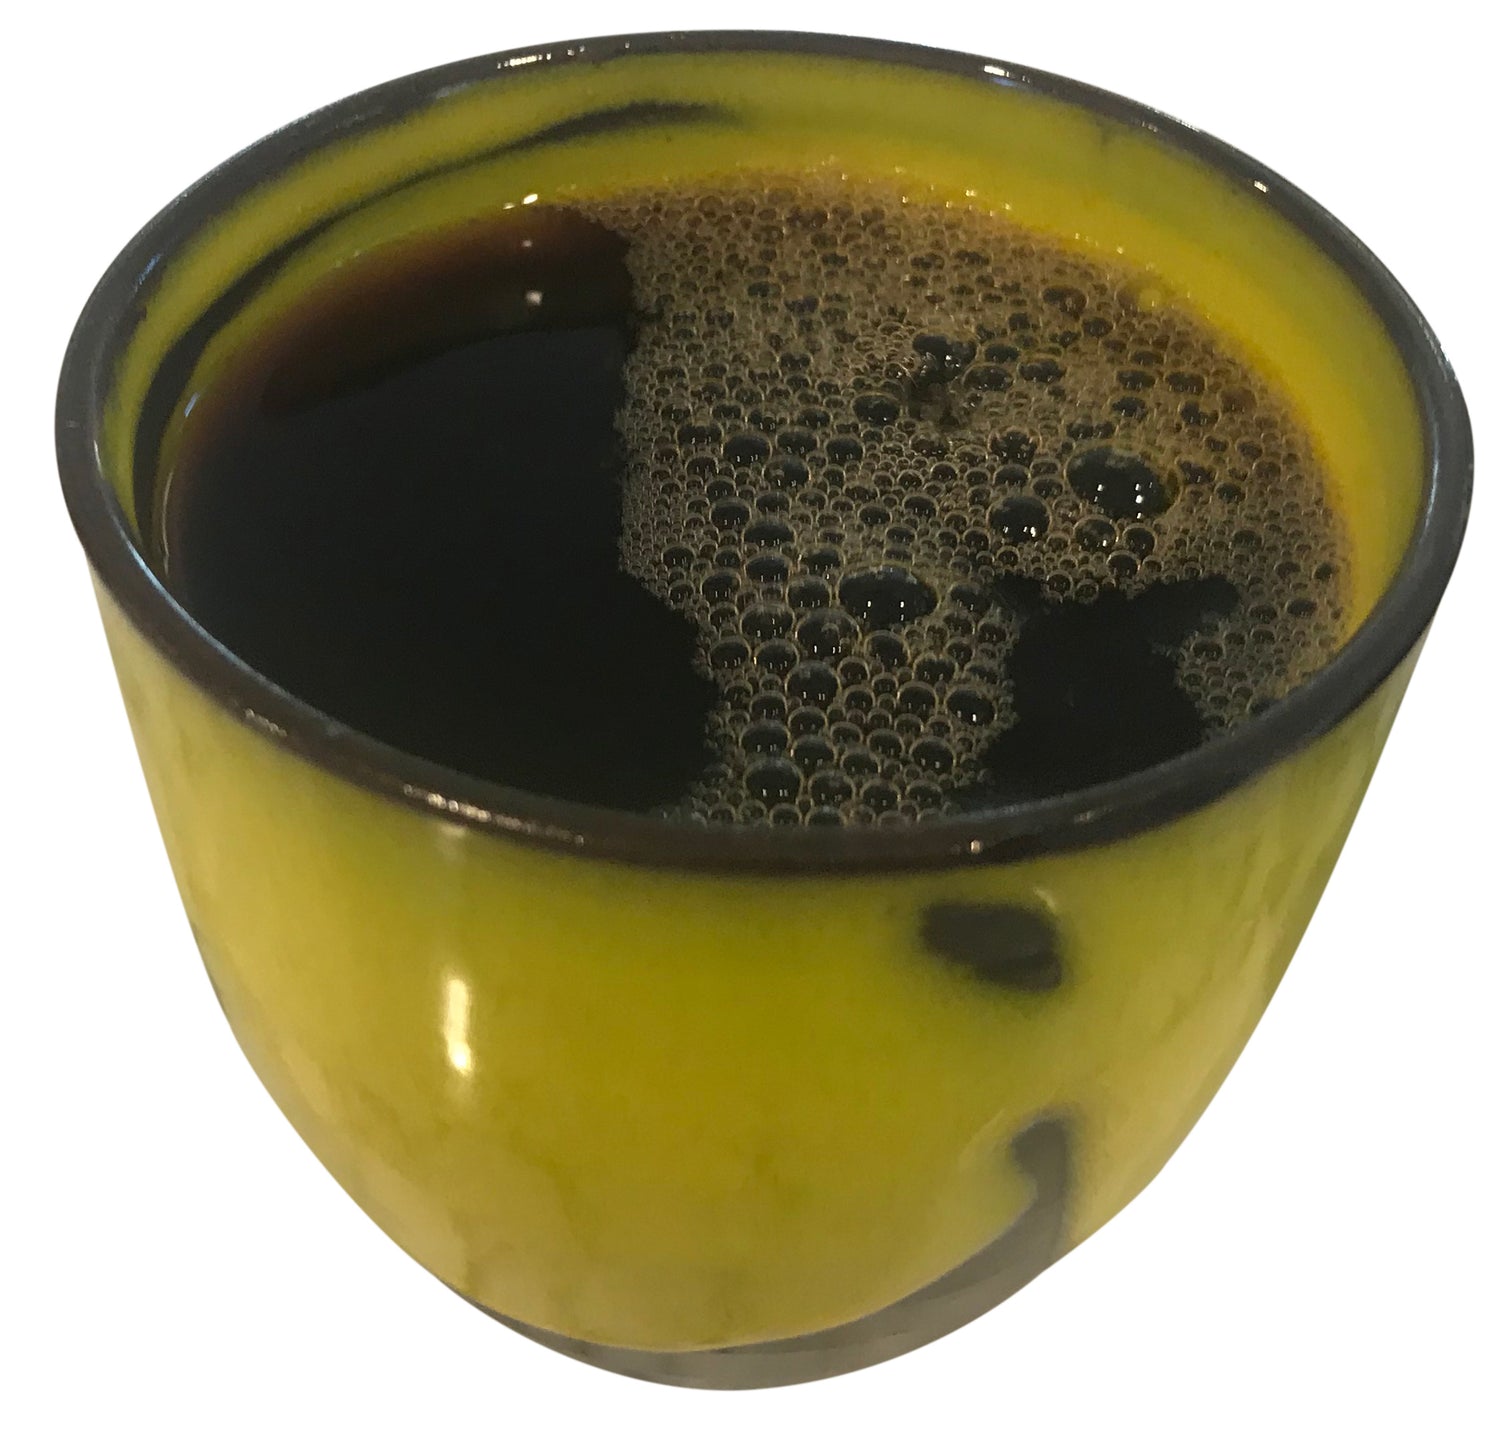 a cup of freshly poured black coffee in a yellow handmade cup